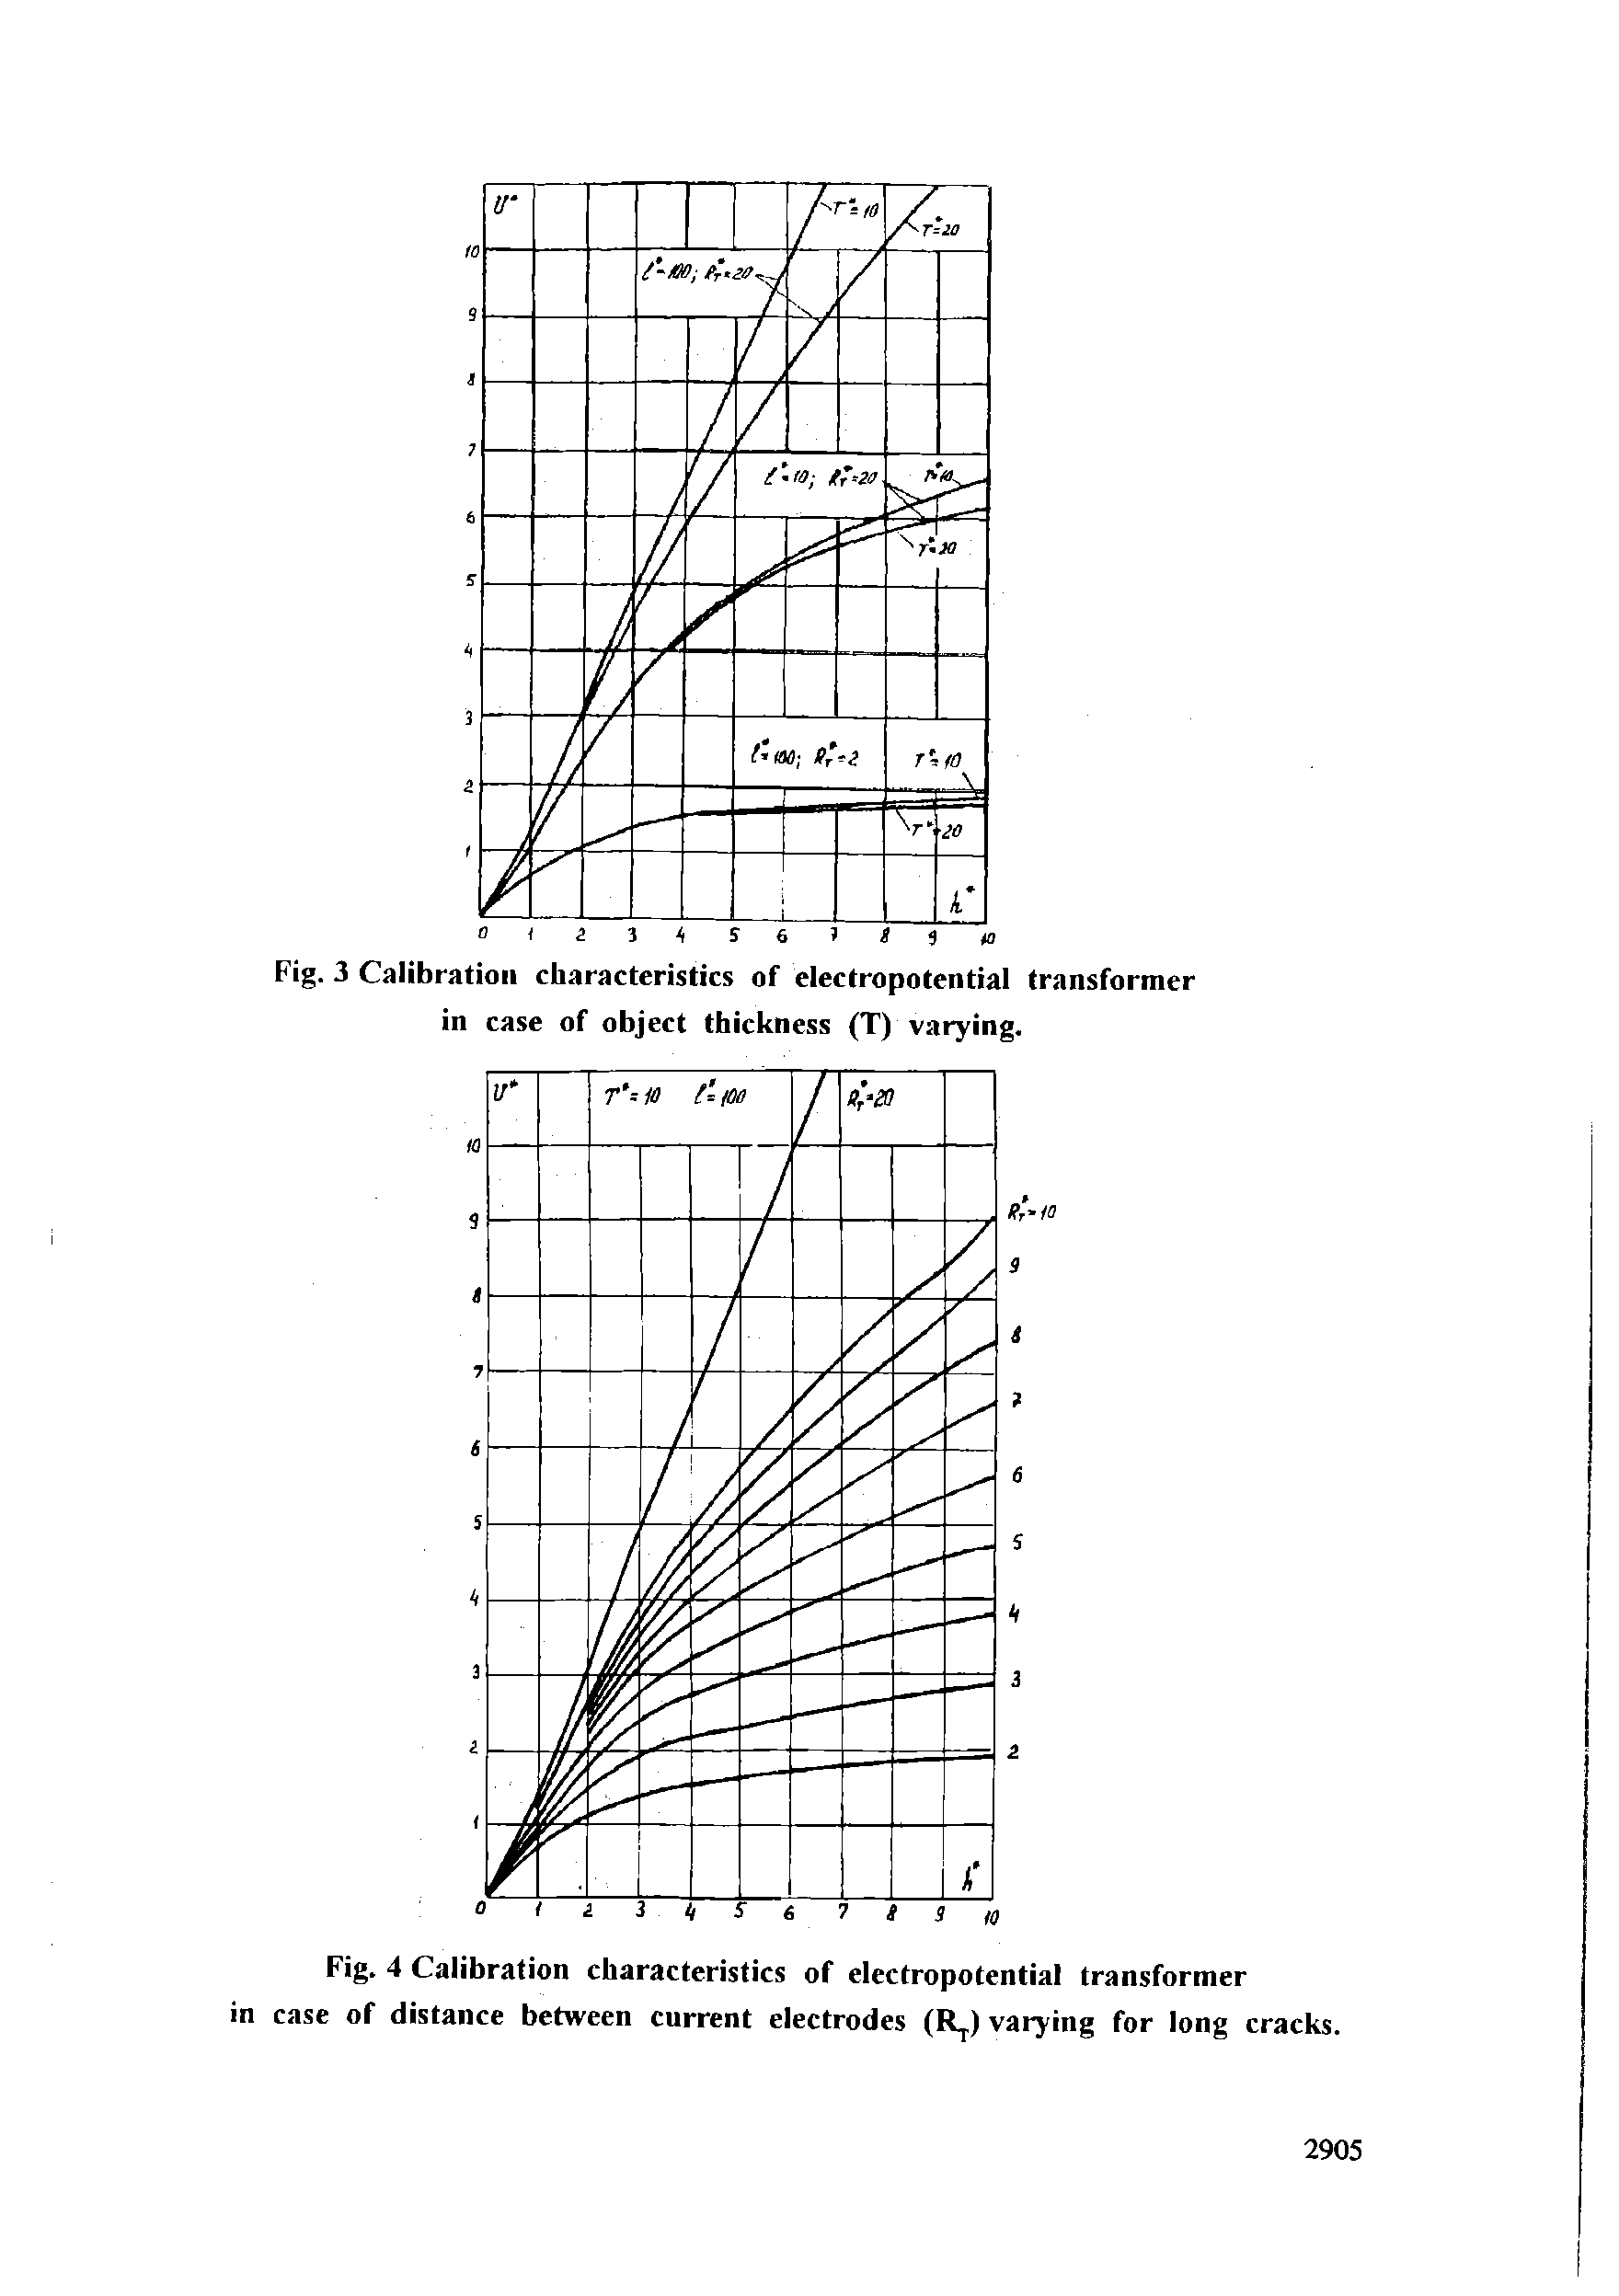 Fig. 3 Calibration characteristics of electropotential transformer in case of object thickness (T) varying.